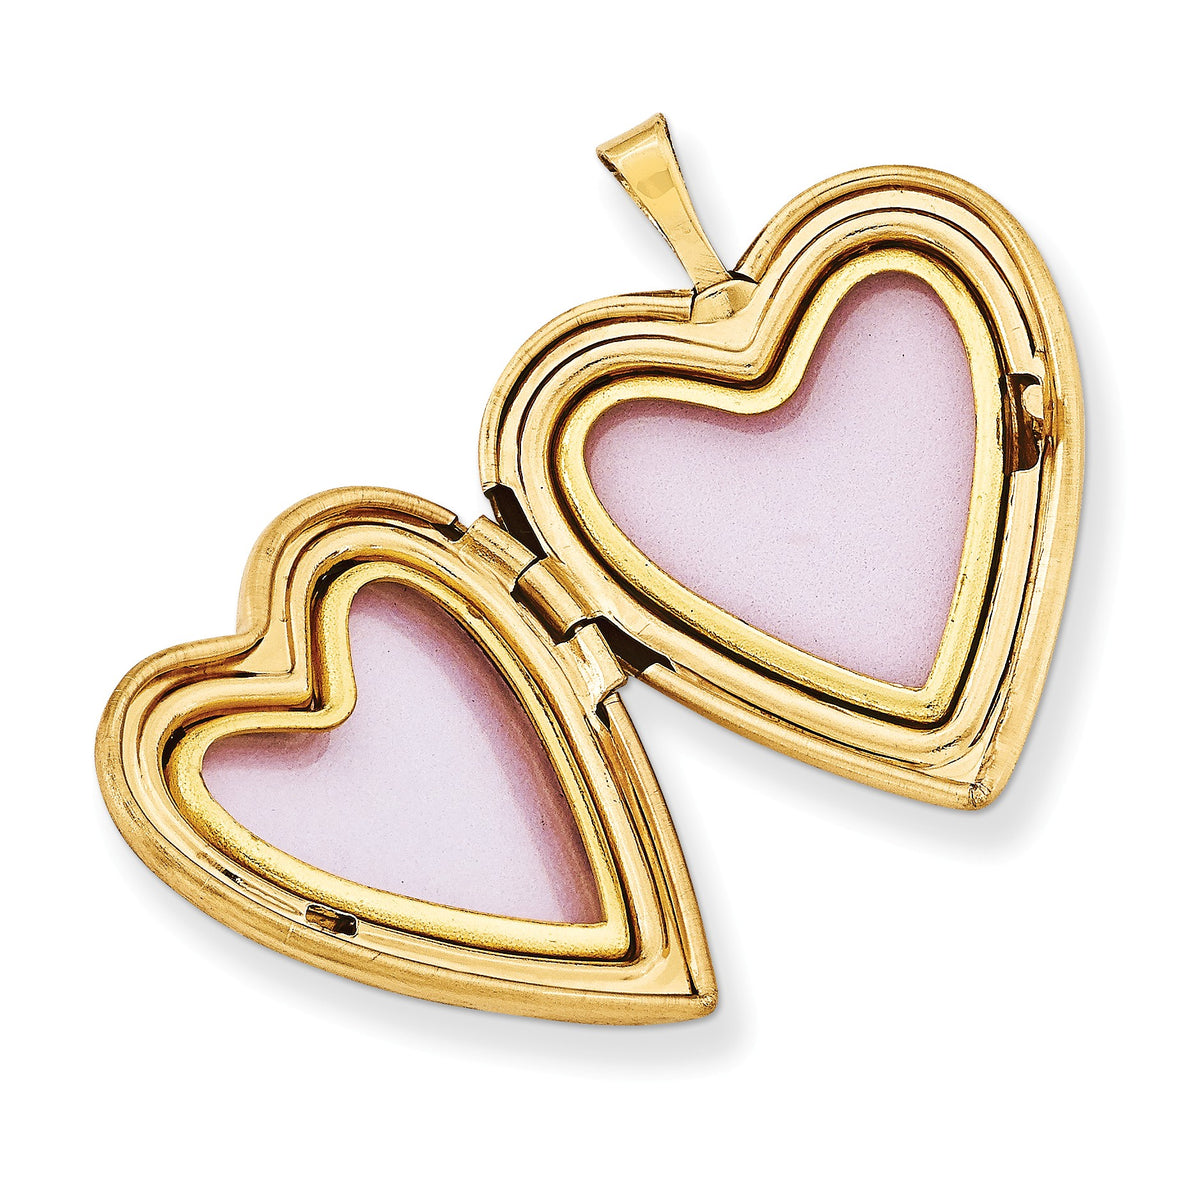 Alternate view of the 14k Yellow Gold 20mm Heart Locket with Flower Vine Border by The Black Bow Jewelry Co.